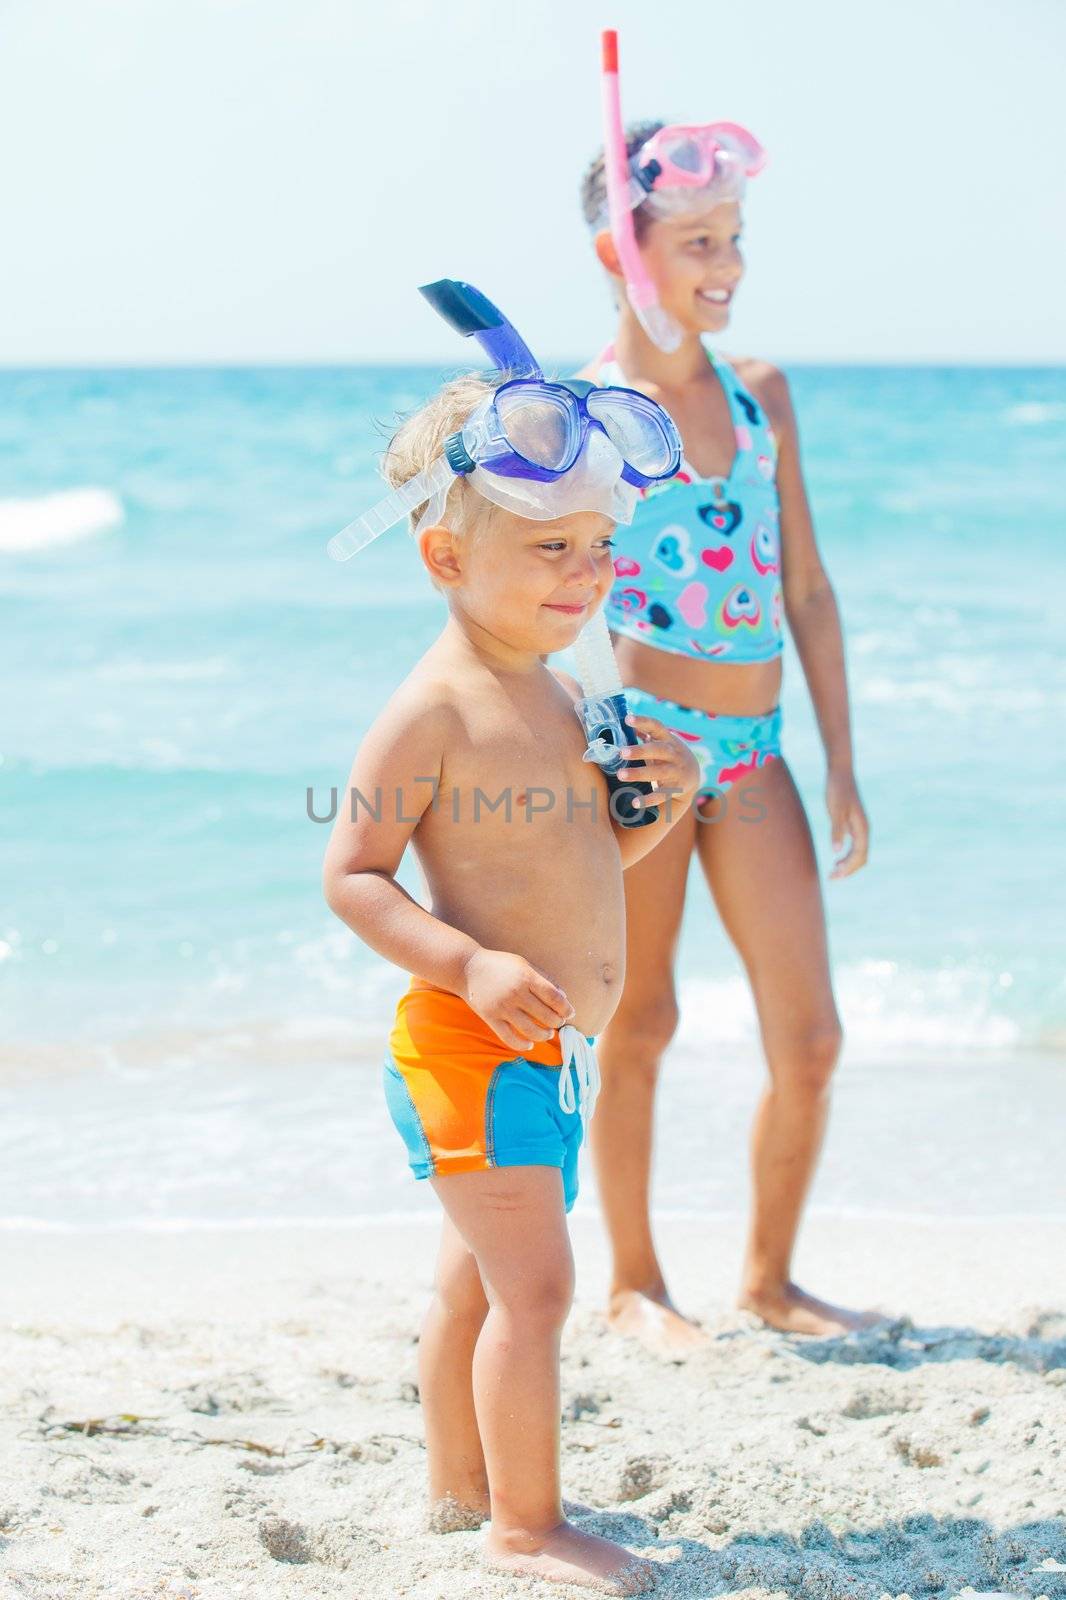 Happy young boy with snorkeling equipment on sandy tropical beach, his sister background.